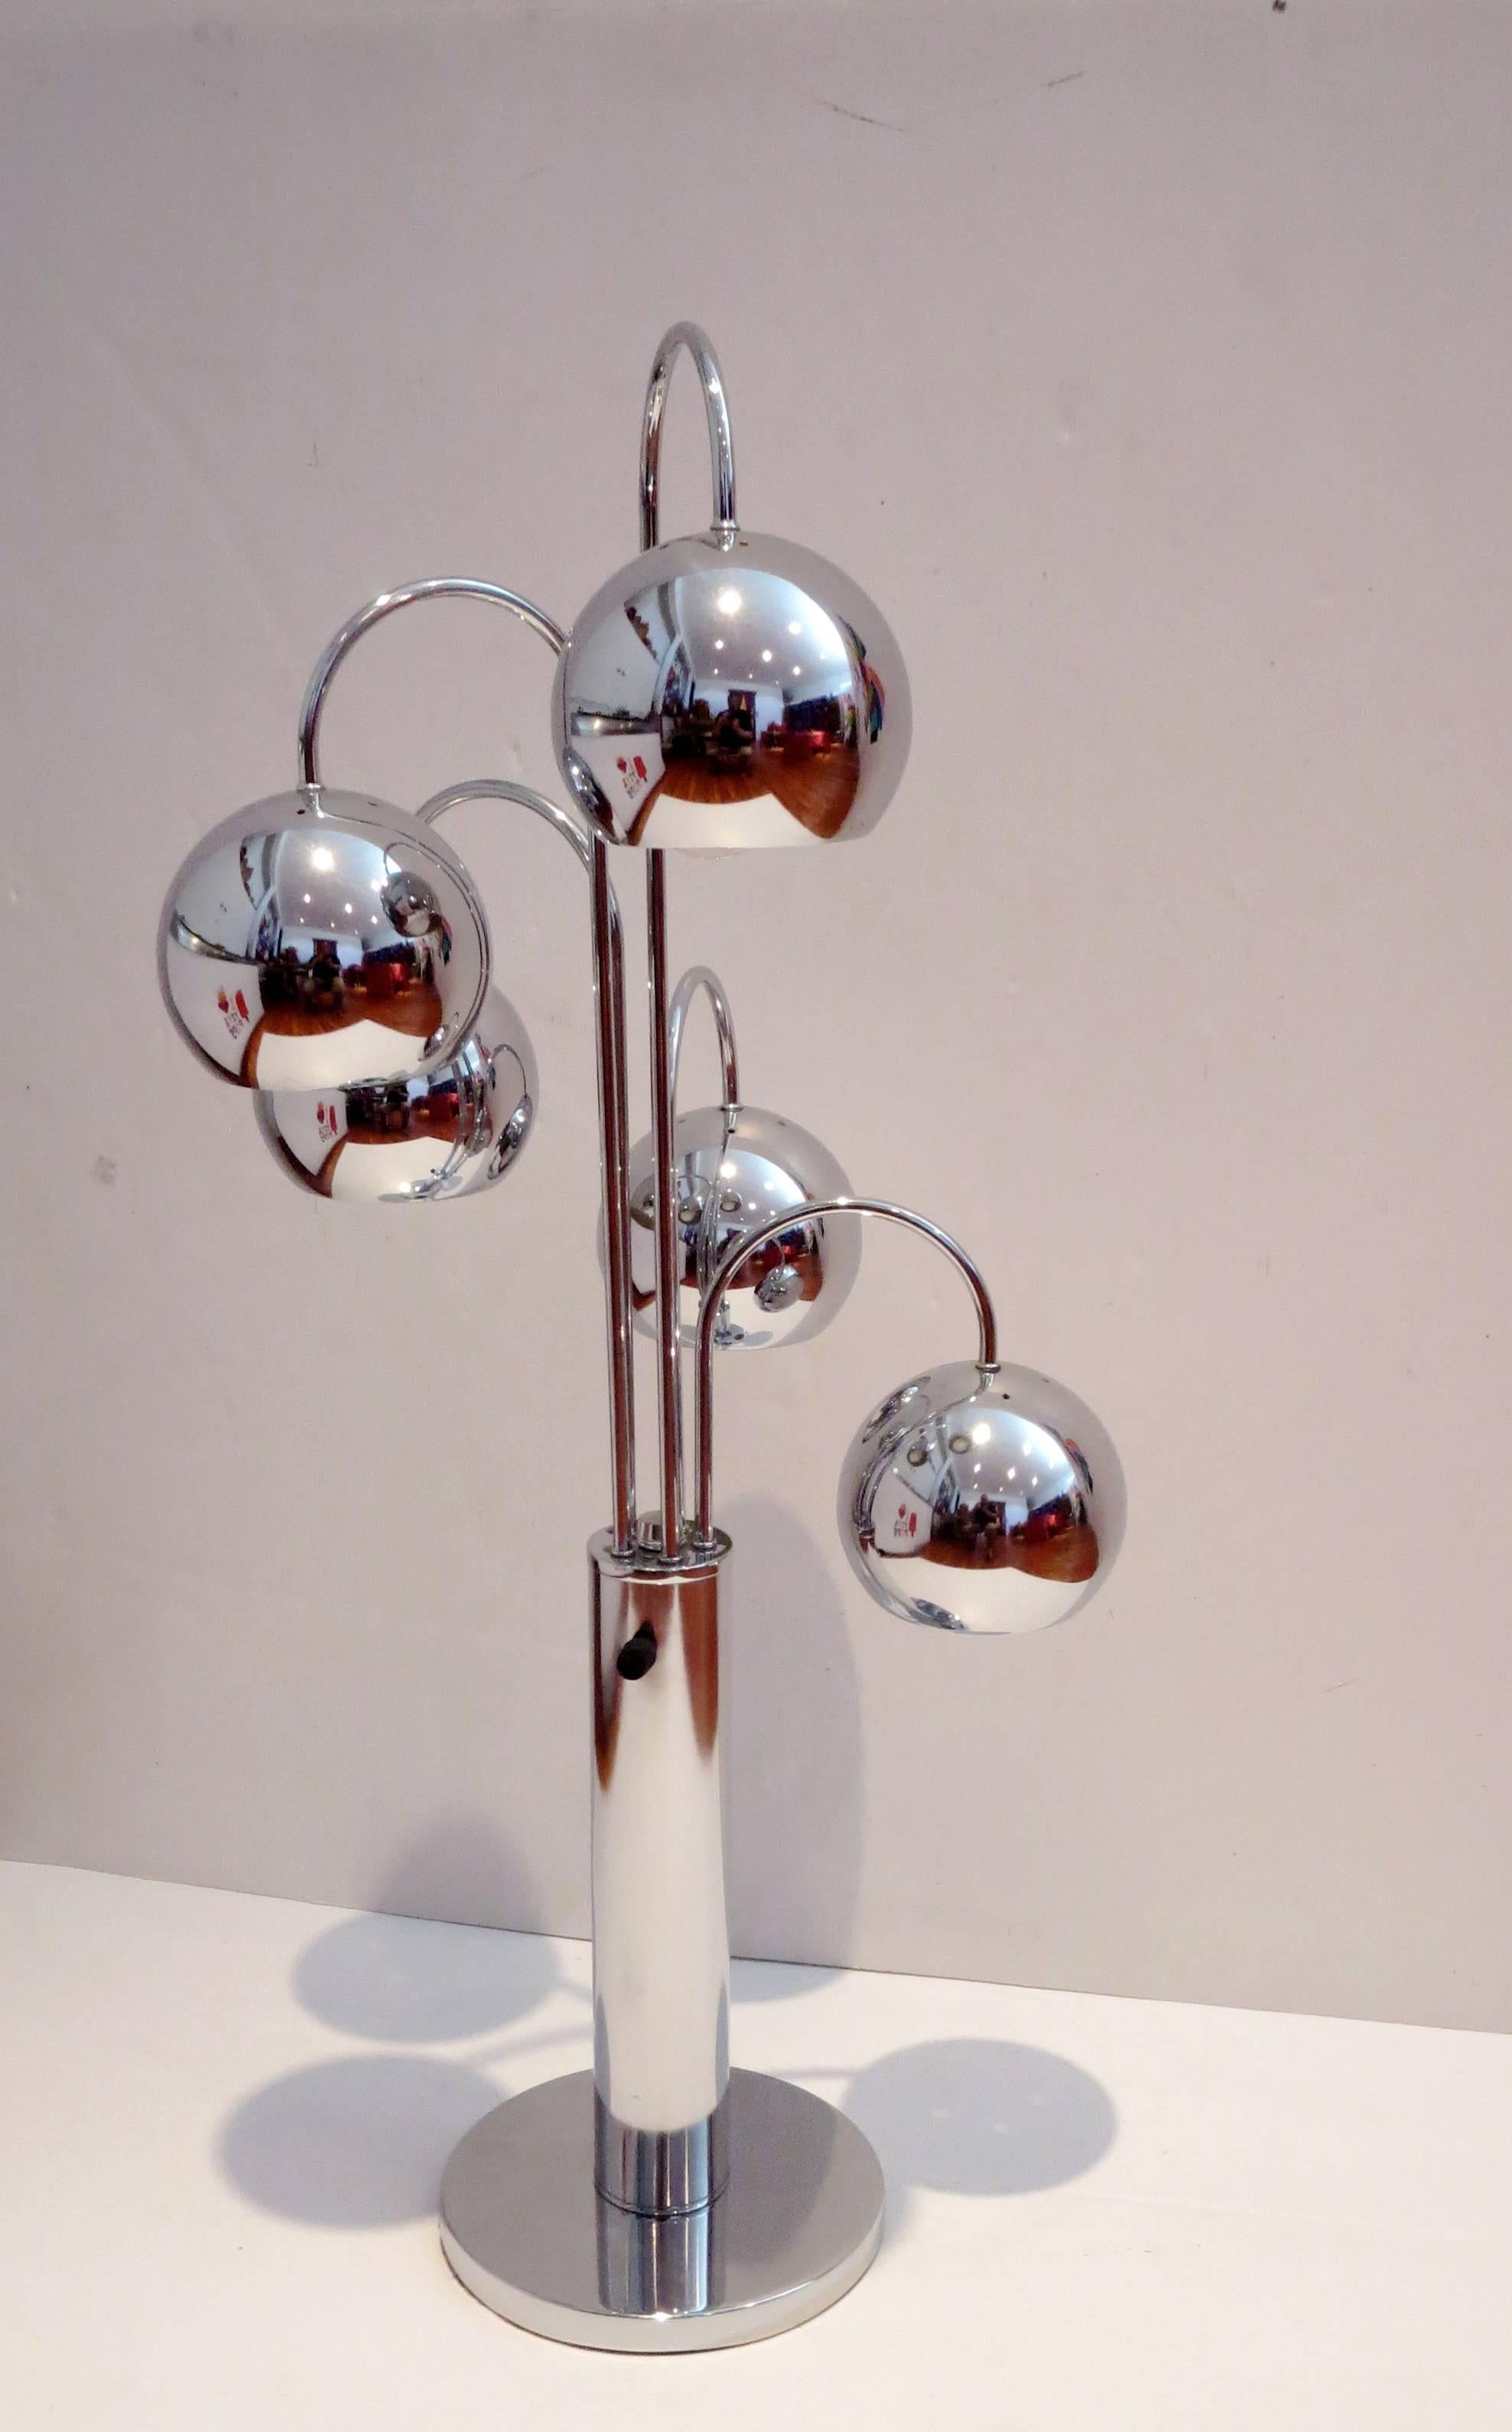 Nice and unique pair of table chrome lamp, circa 1970s, each lamp holds five chrome sphere lamp shades, with dimmer switch in very nice and clean condition chrome its been polished and shows very light wear they are beautiful and striking.